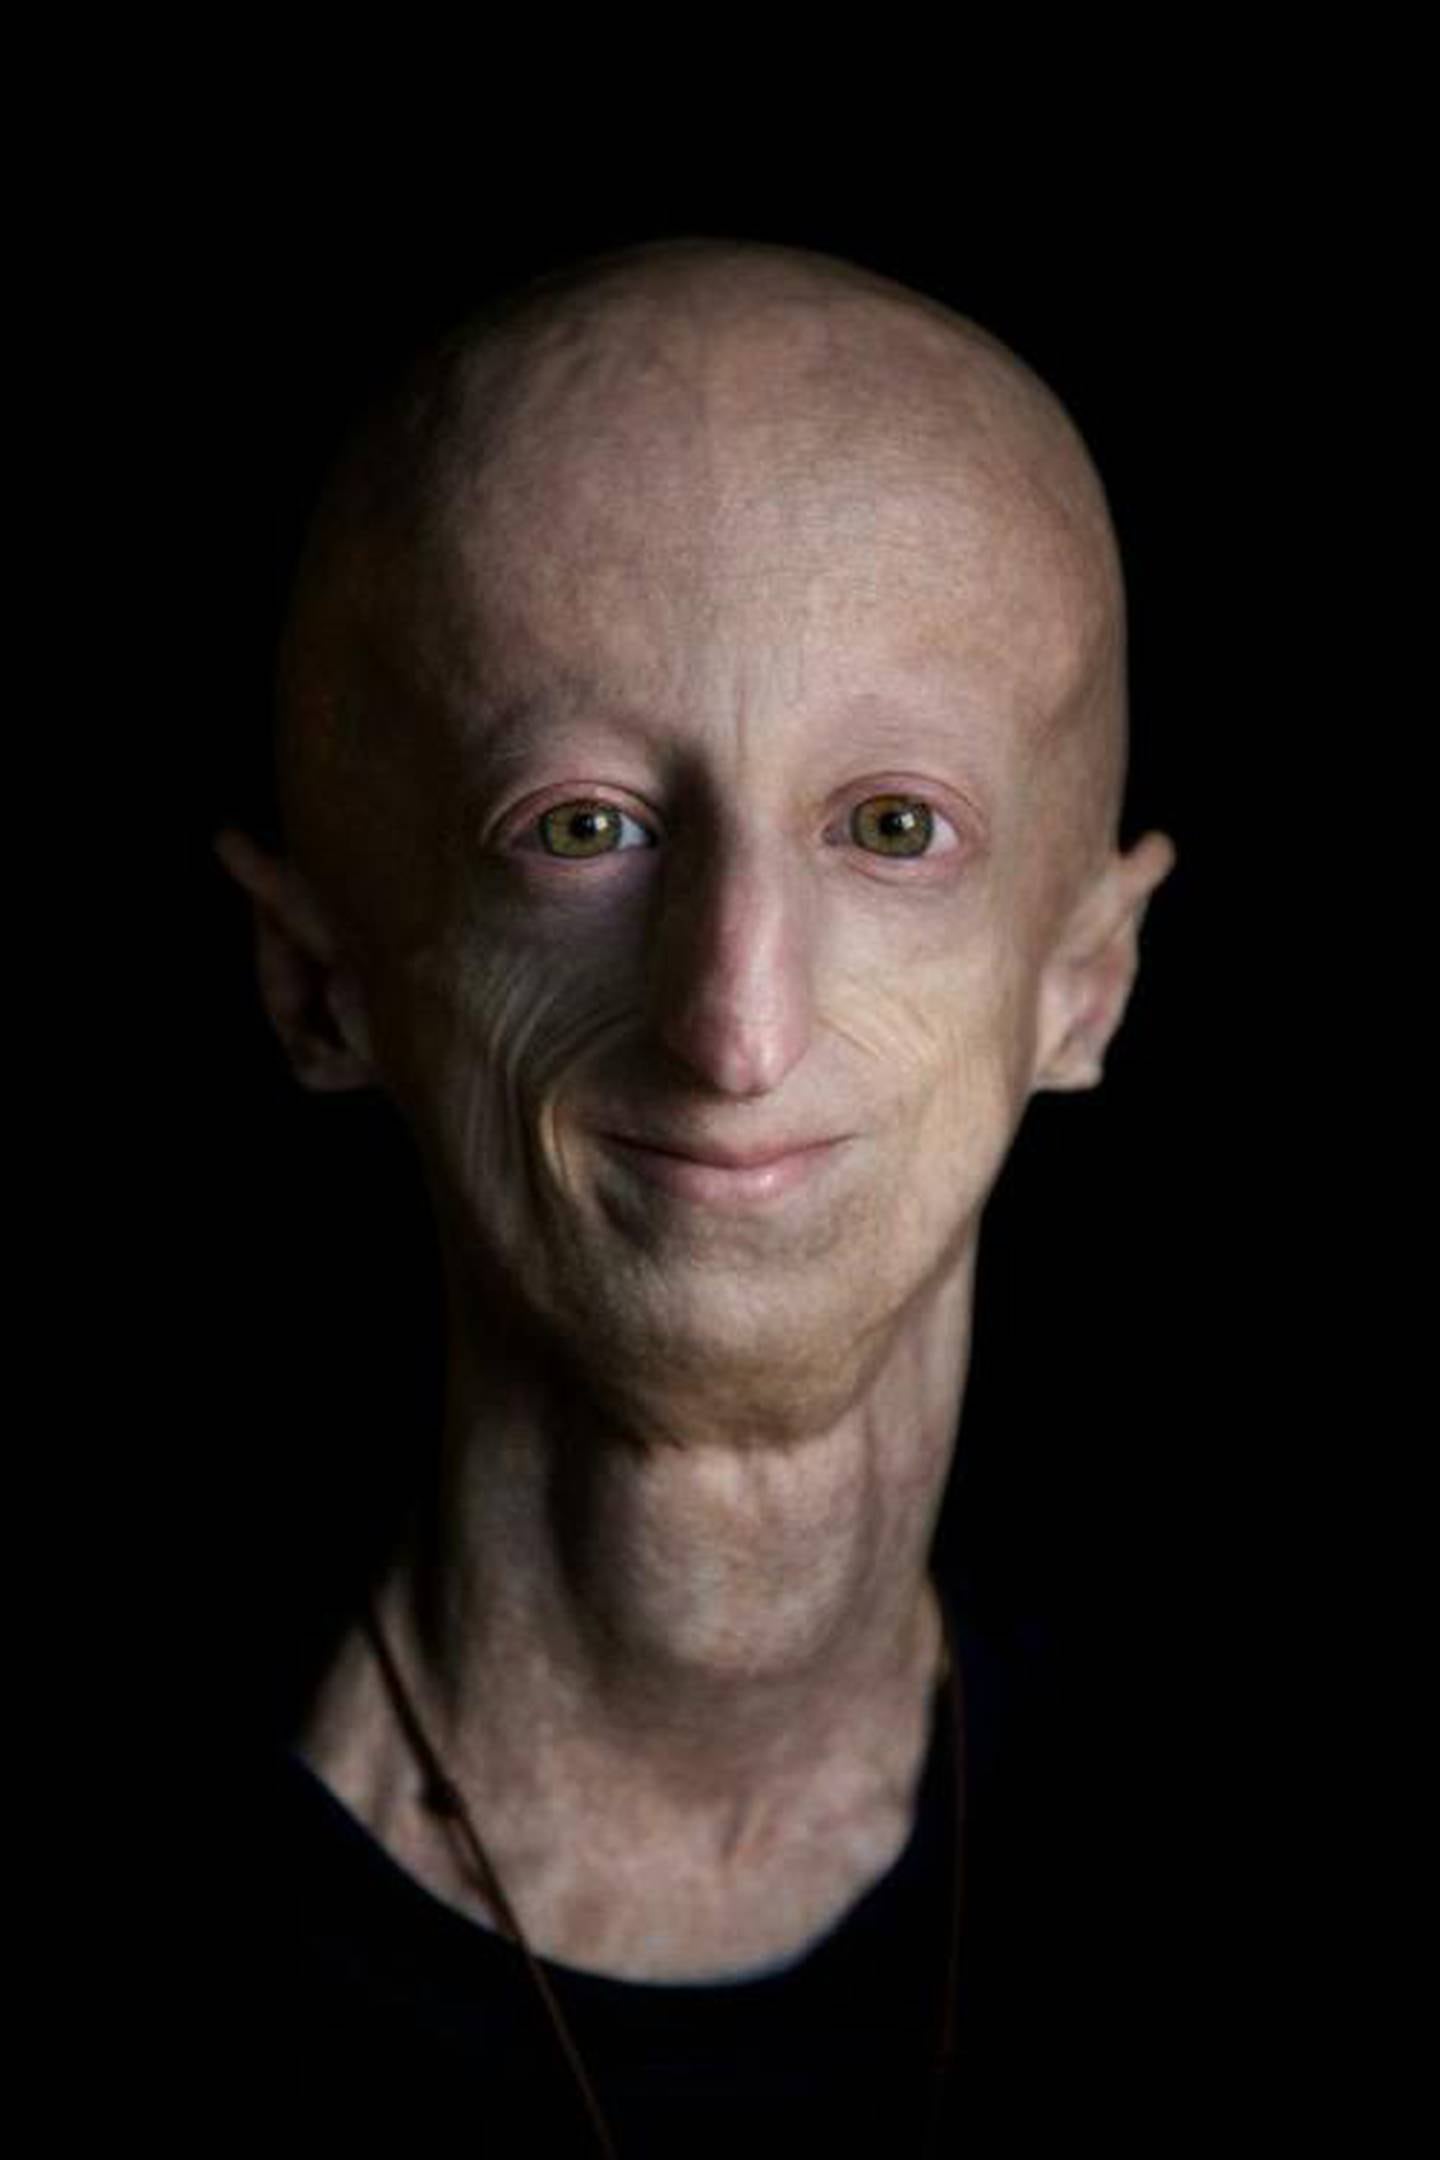 Sammy Basso is a biologist, spokesperson for the Italian Progeria Association Sammy Basso APS and global ambassador for the Progeria Research Foundation.